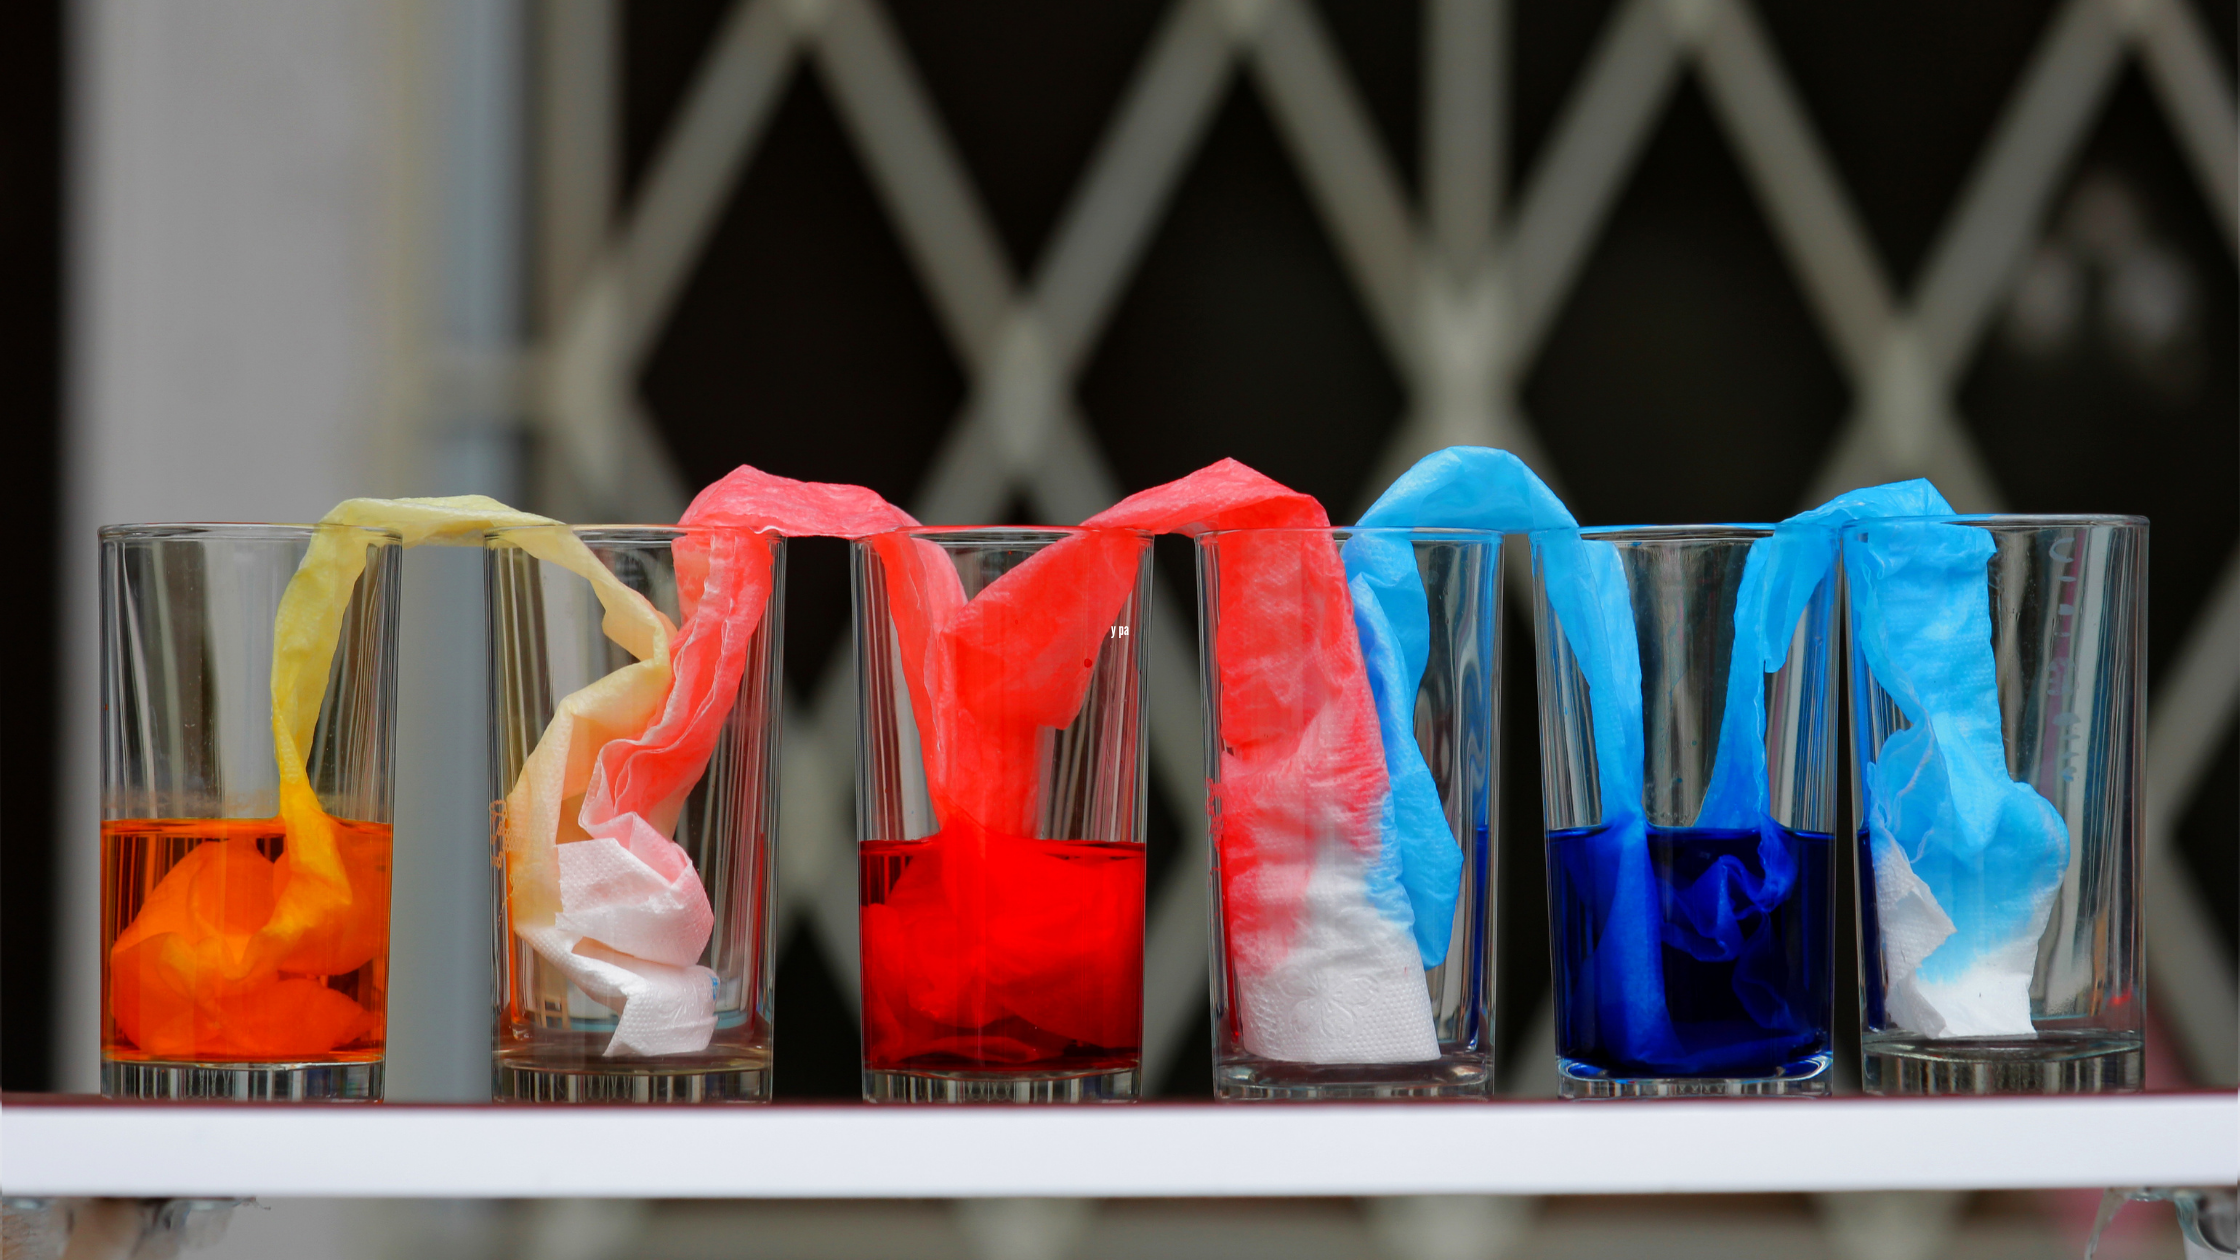 5 Fun & Cool Science Activities with Dye to Do With the Kids 21